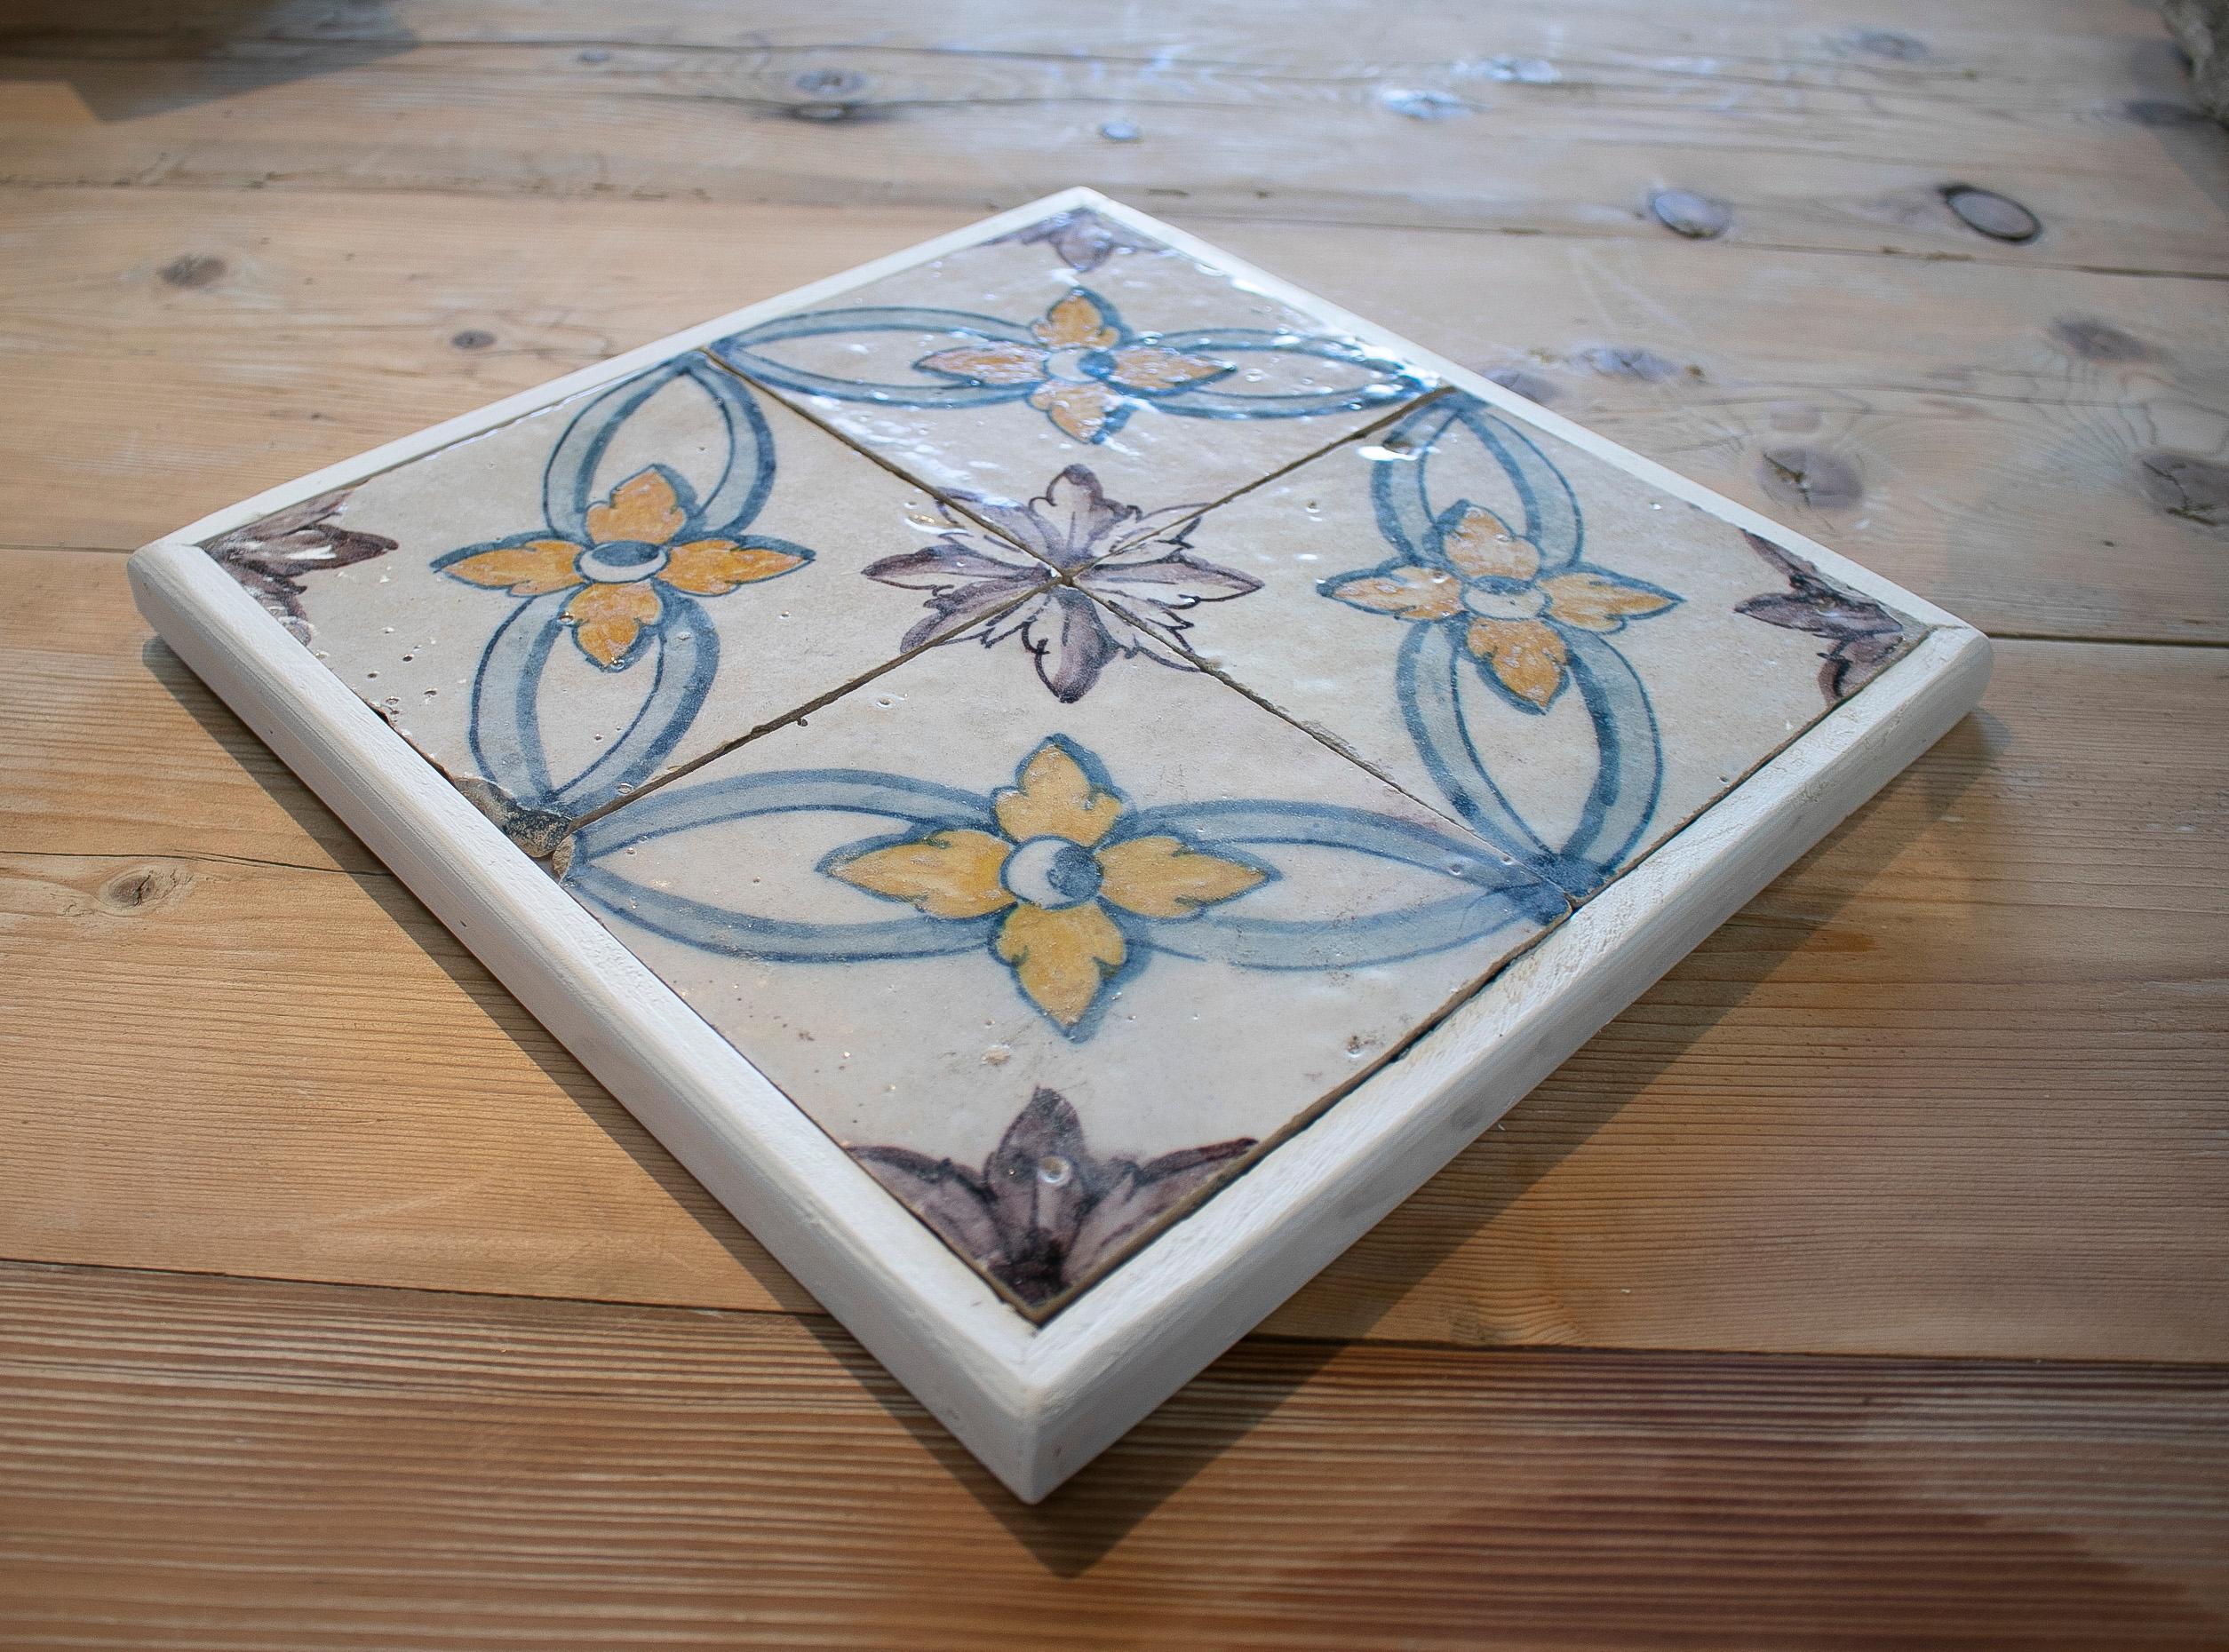 Antique set of four 19th century Portuguese hand painted glazed ceramic patterned tiles with white frame

Dimension do not include frame.